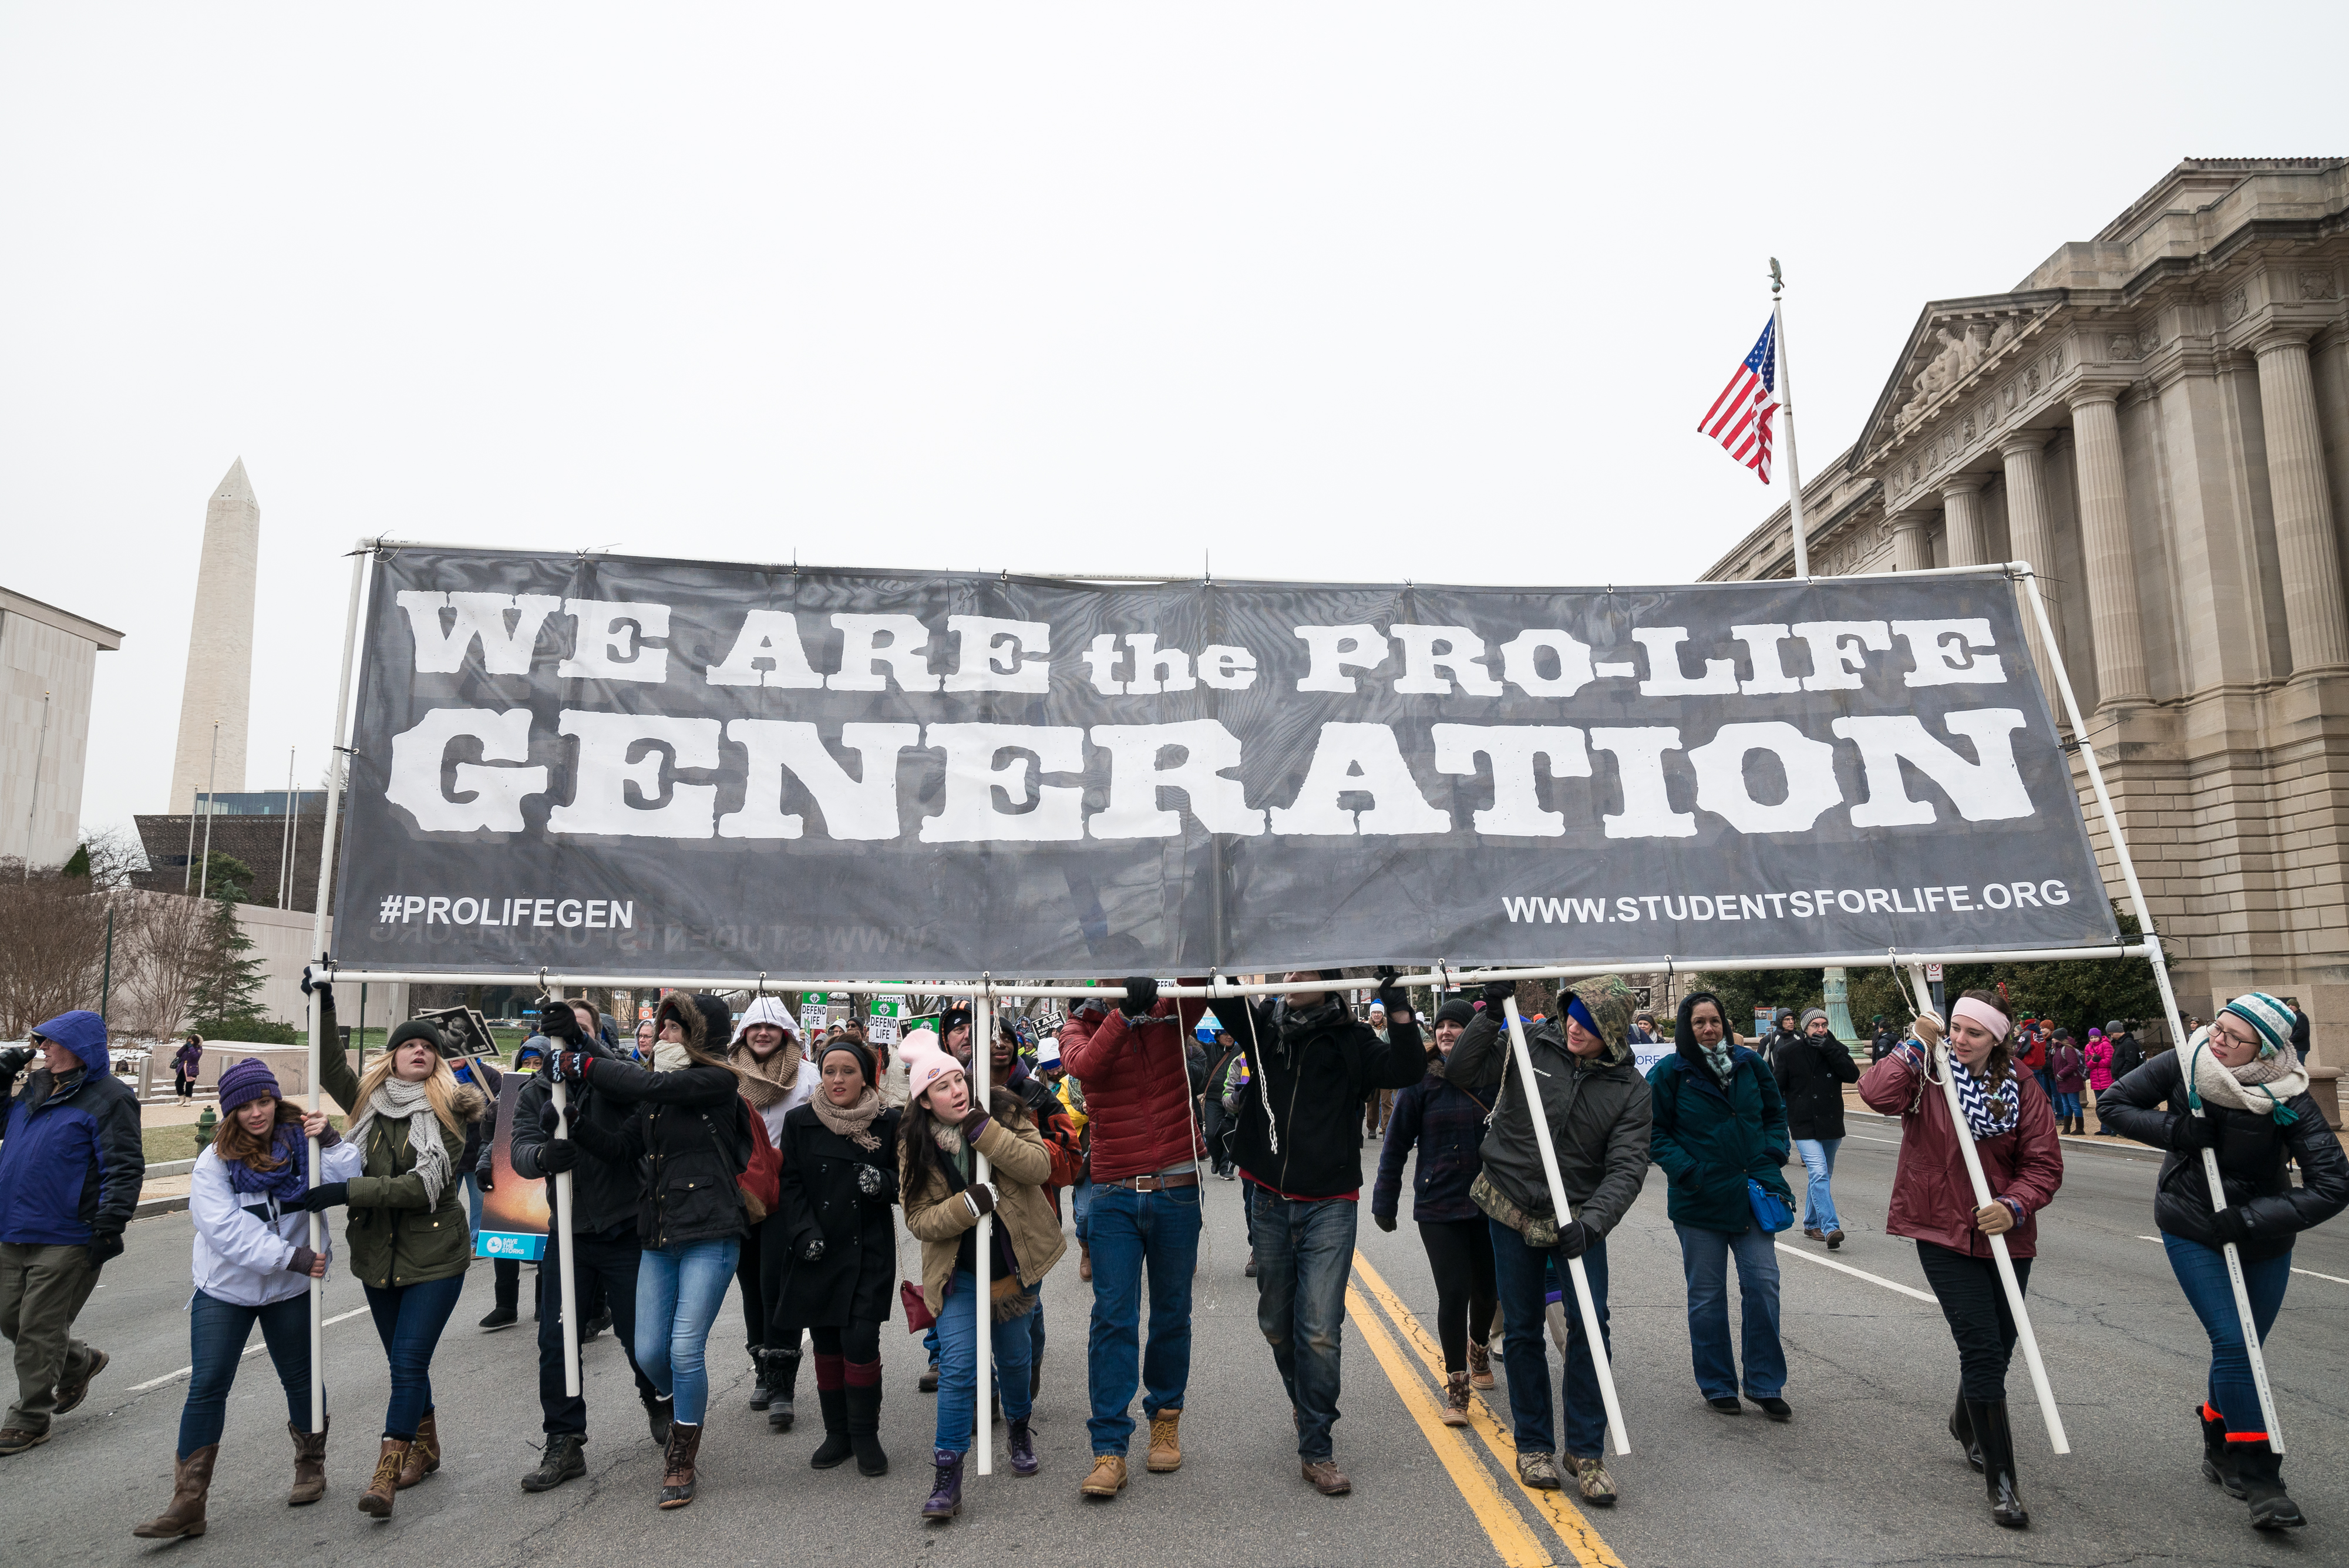 WASHINGTON, D C , UNITED STATES - 2016/01/22: Pro-Life marchers participate in the 